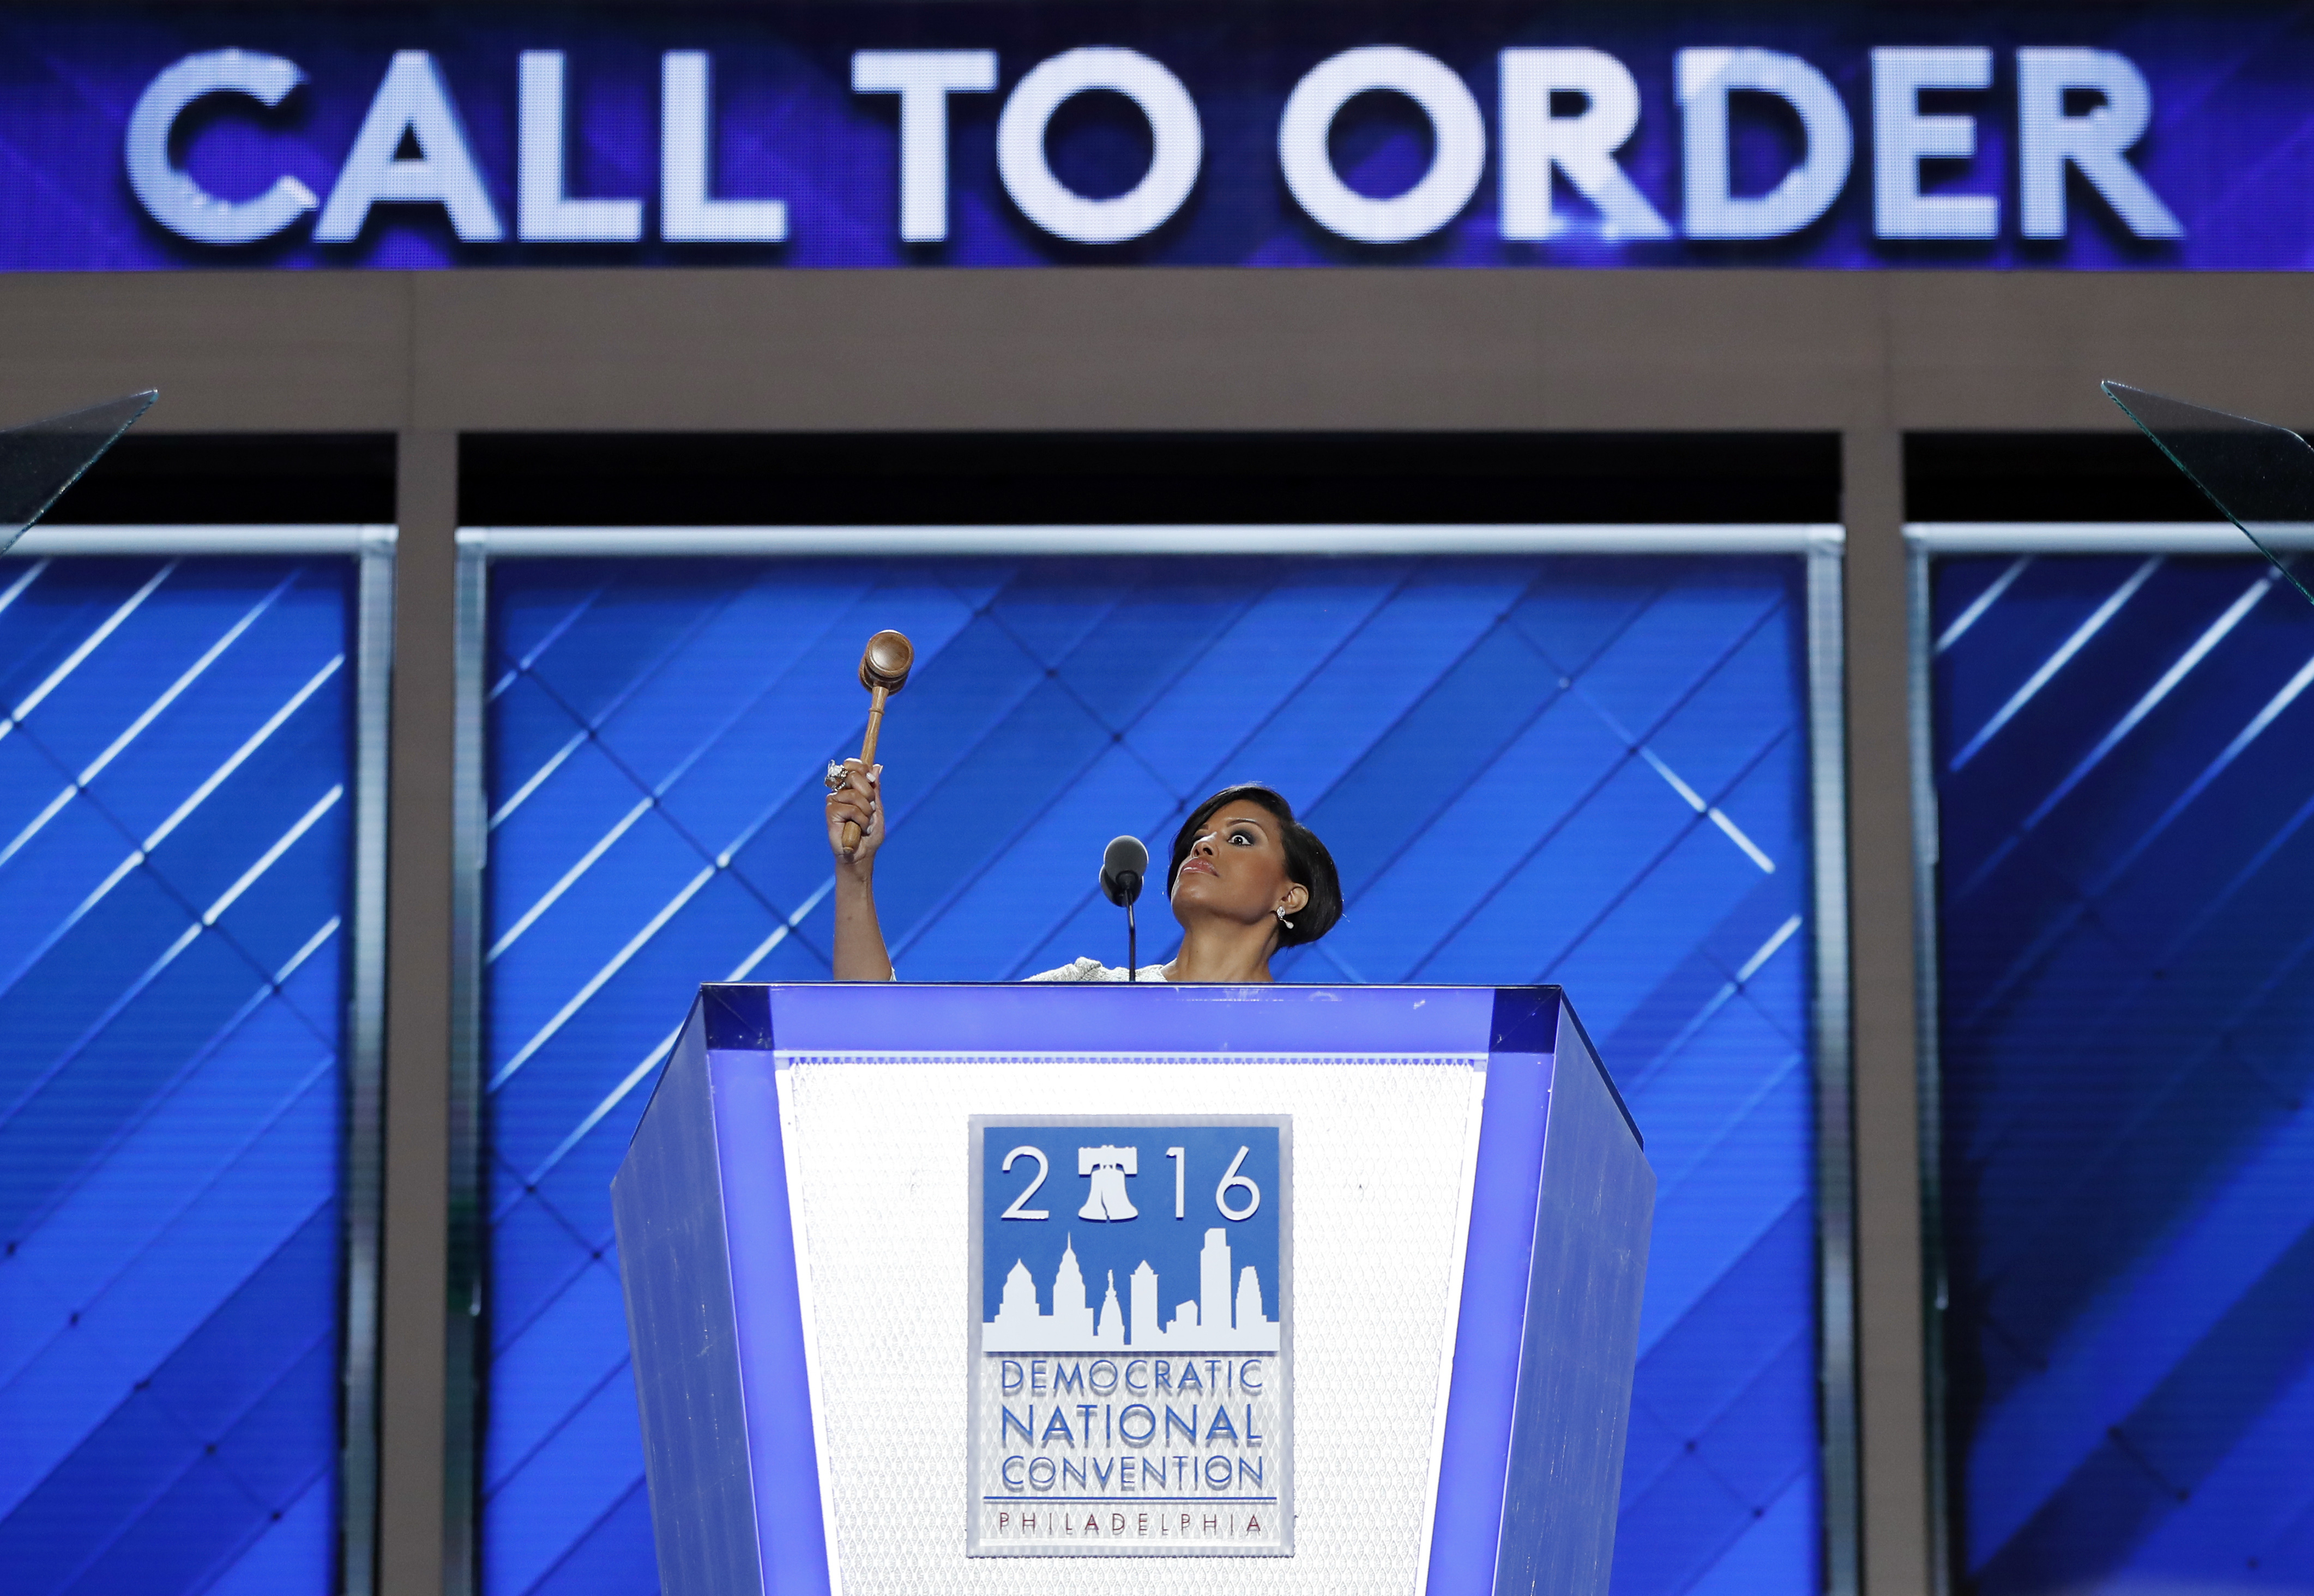 Baltimore Mayor Stephanie Rawlings-Blake raises the gavel as she calls the convention to order.